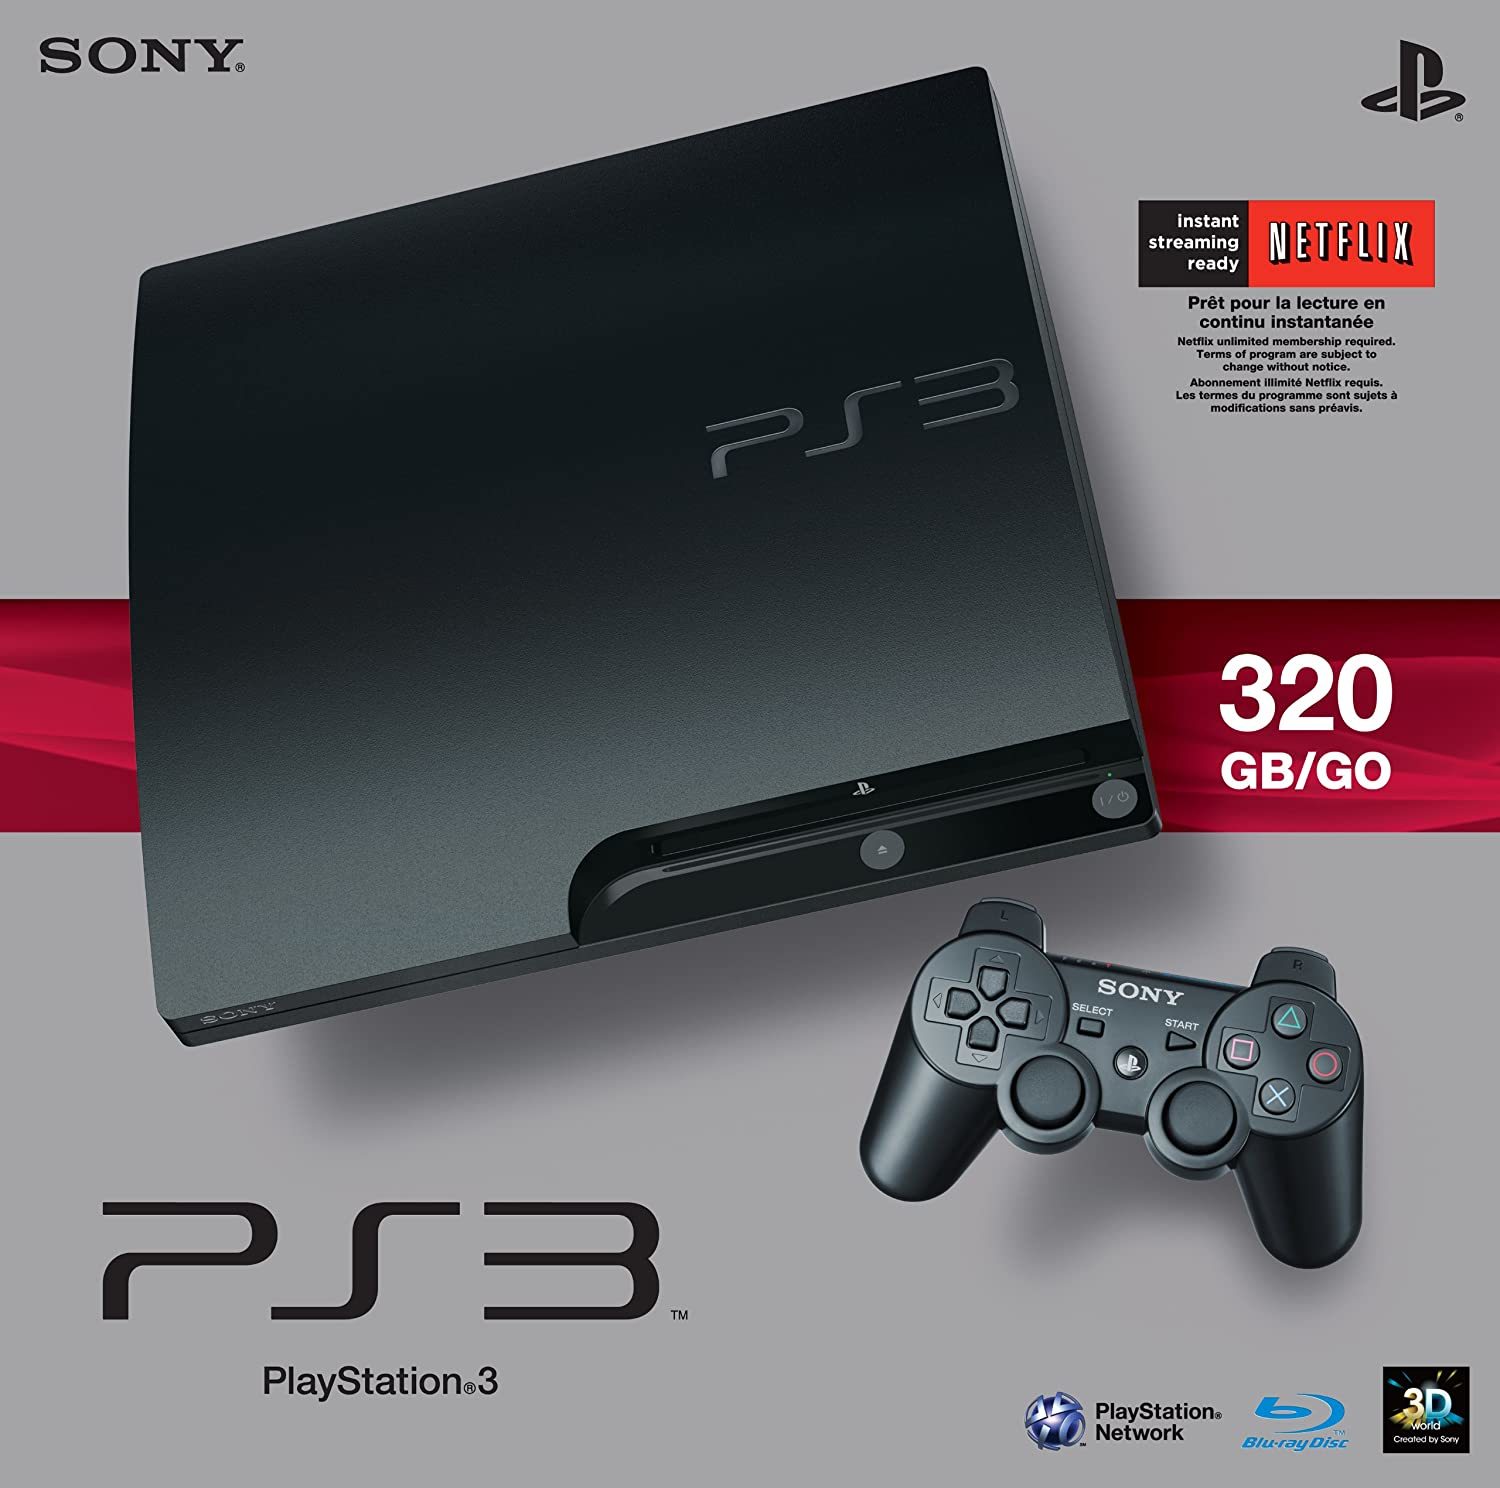 Primary image for Sony PlayStation 3 Slim 320 GB Charcoal Black Console